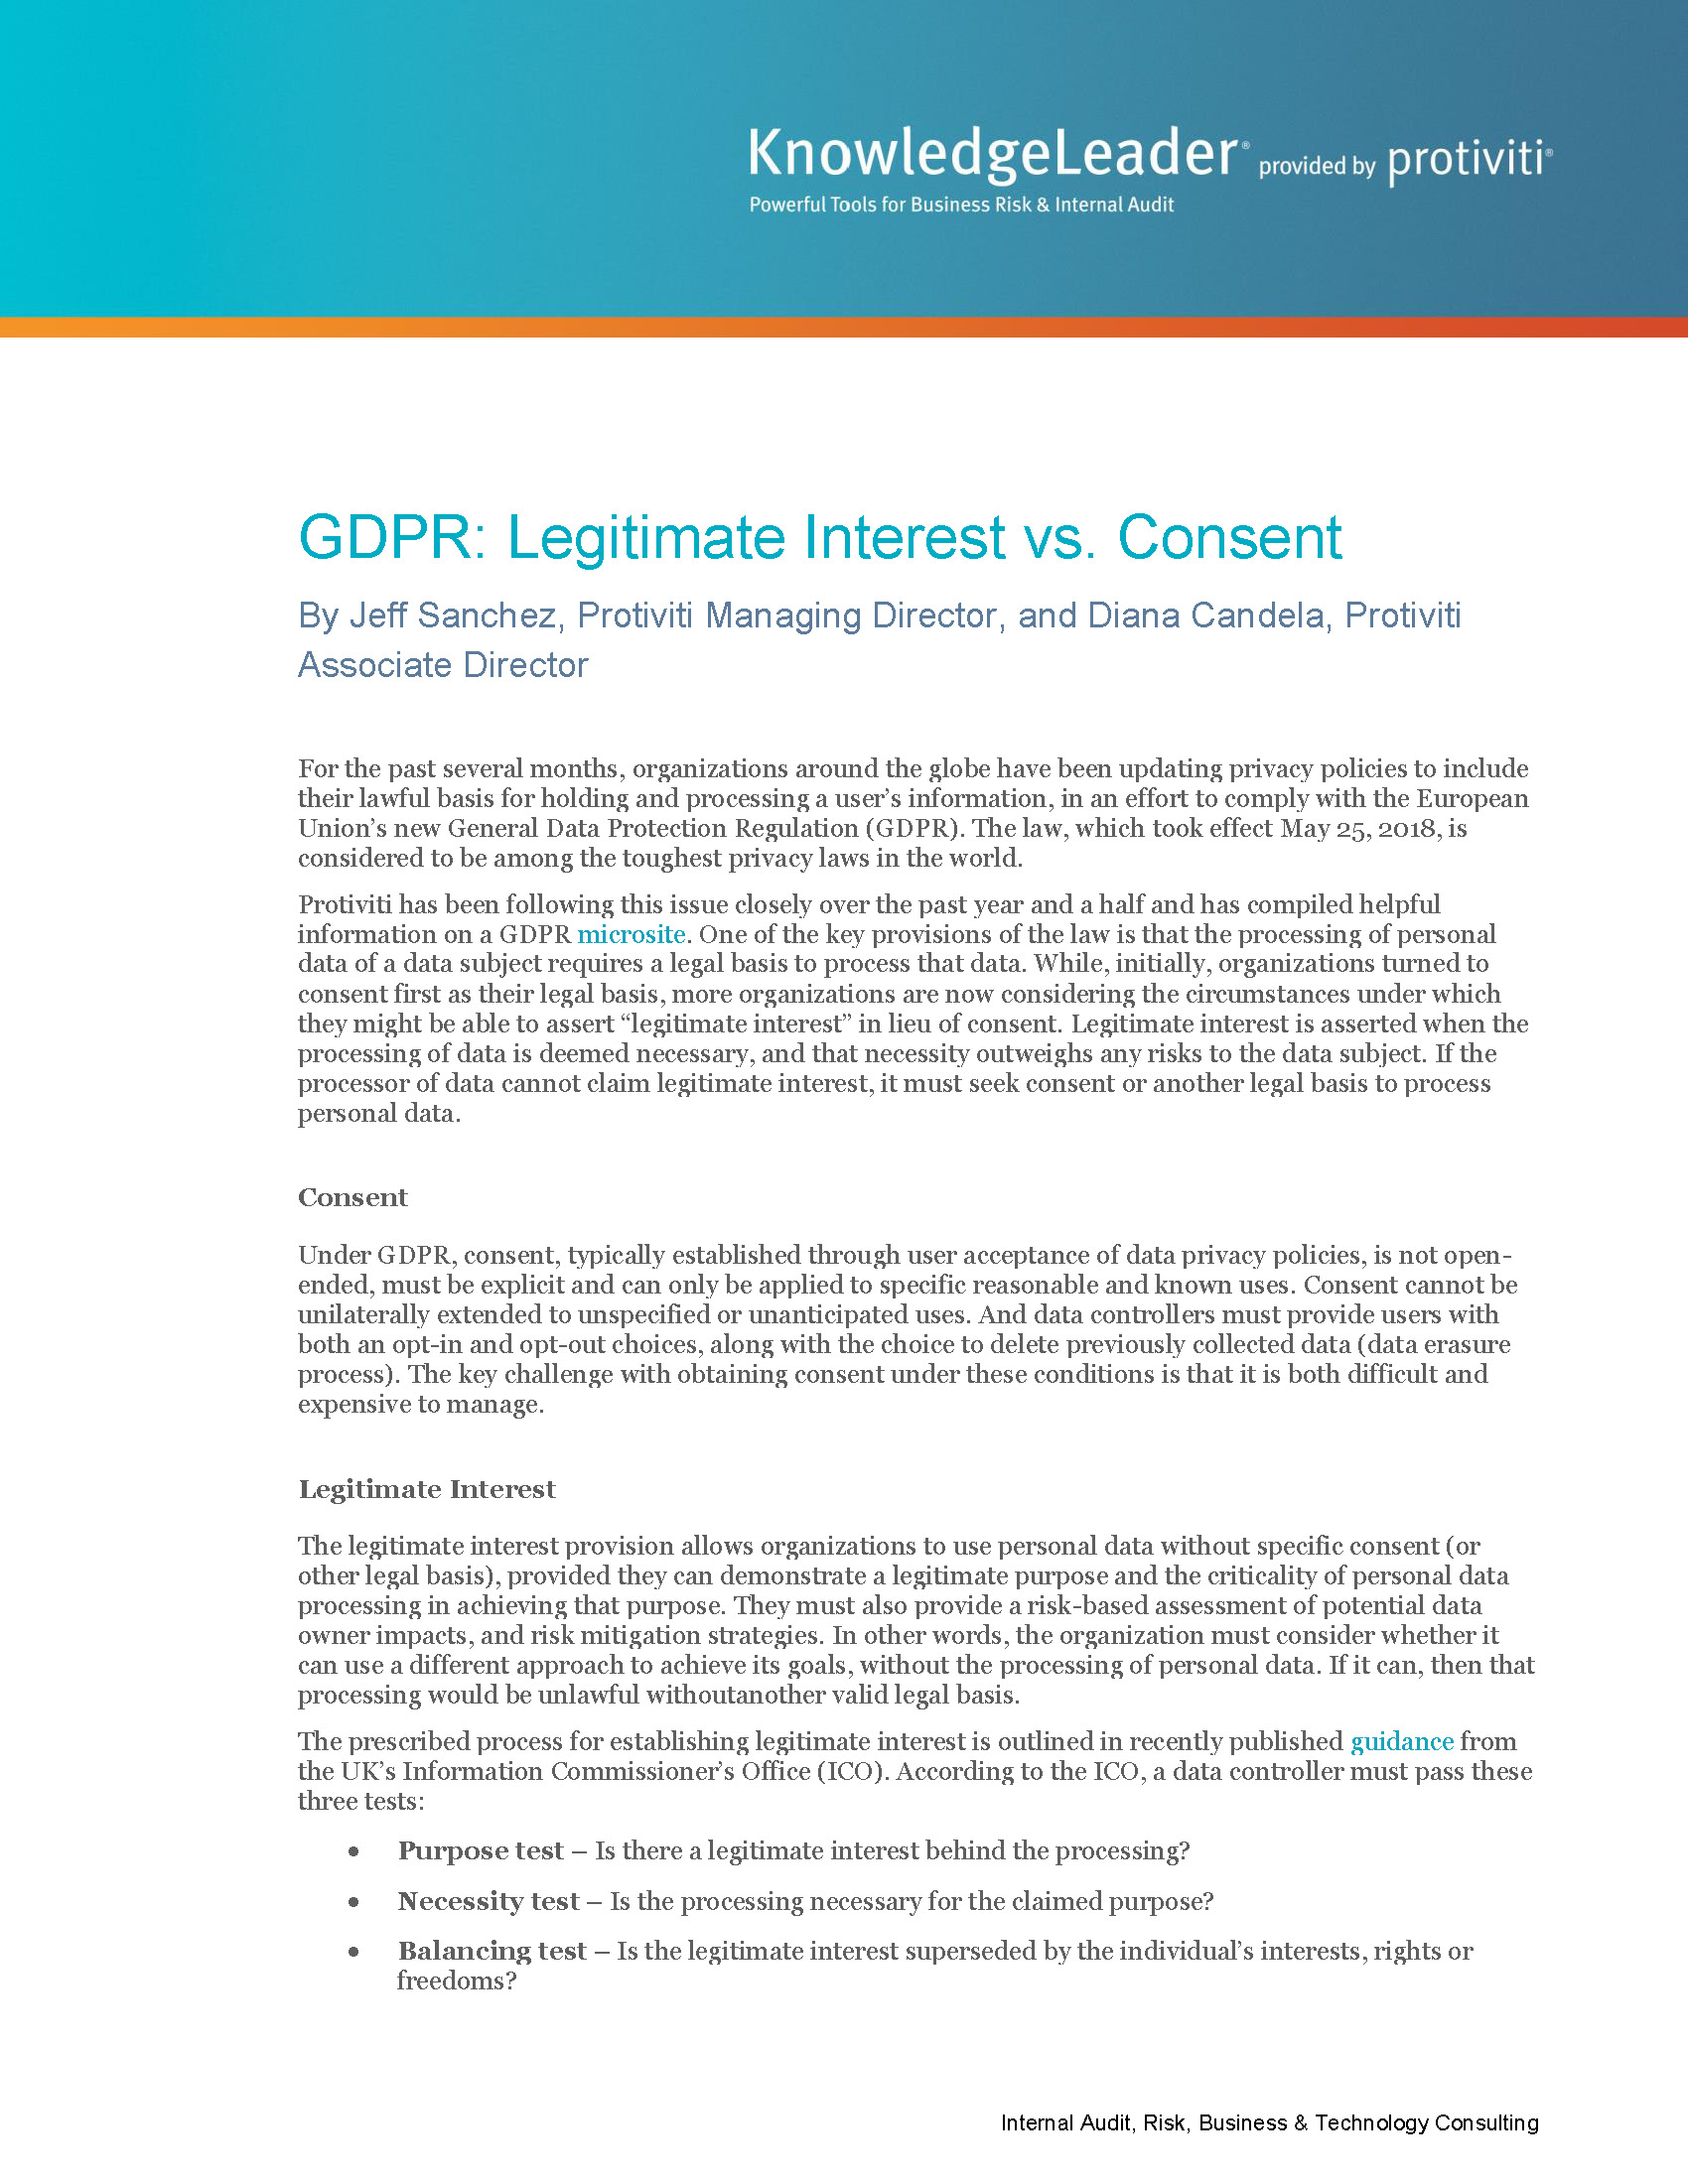 Screenshot of the first page of GDPR Legitimate Interest vs. Consent